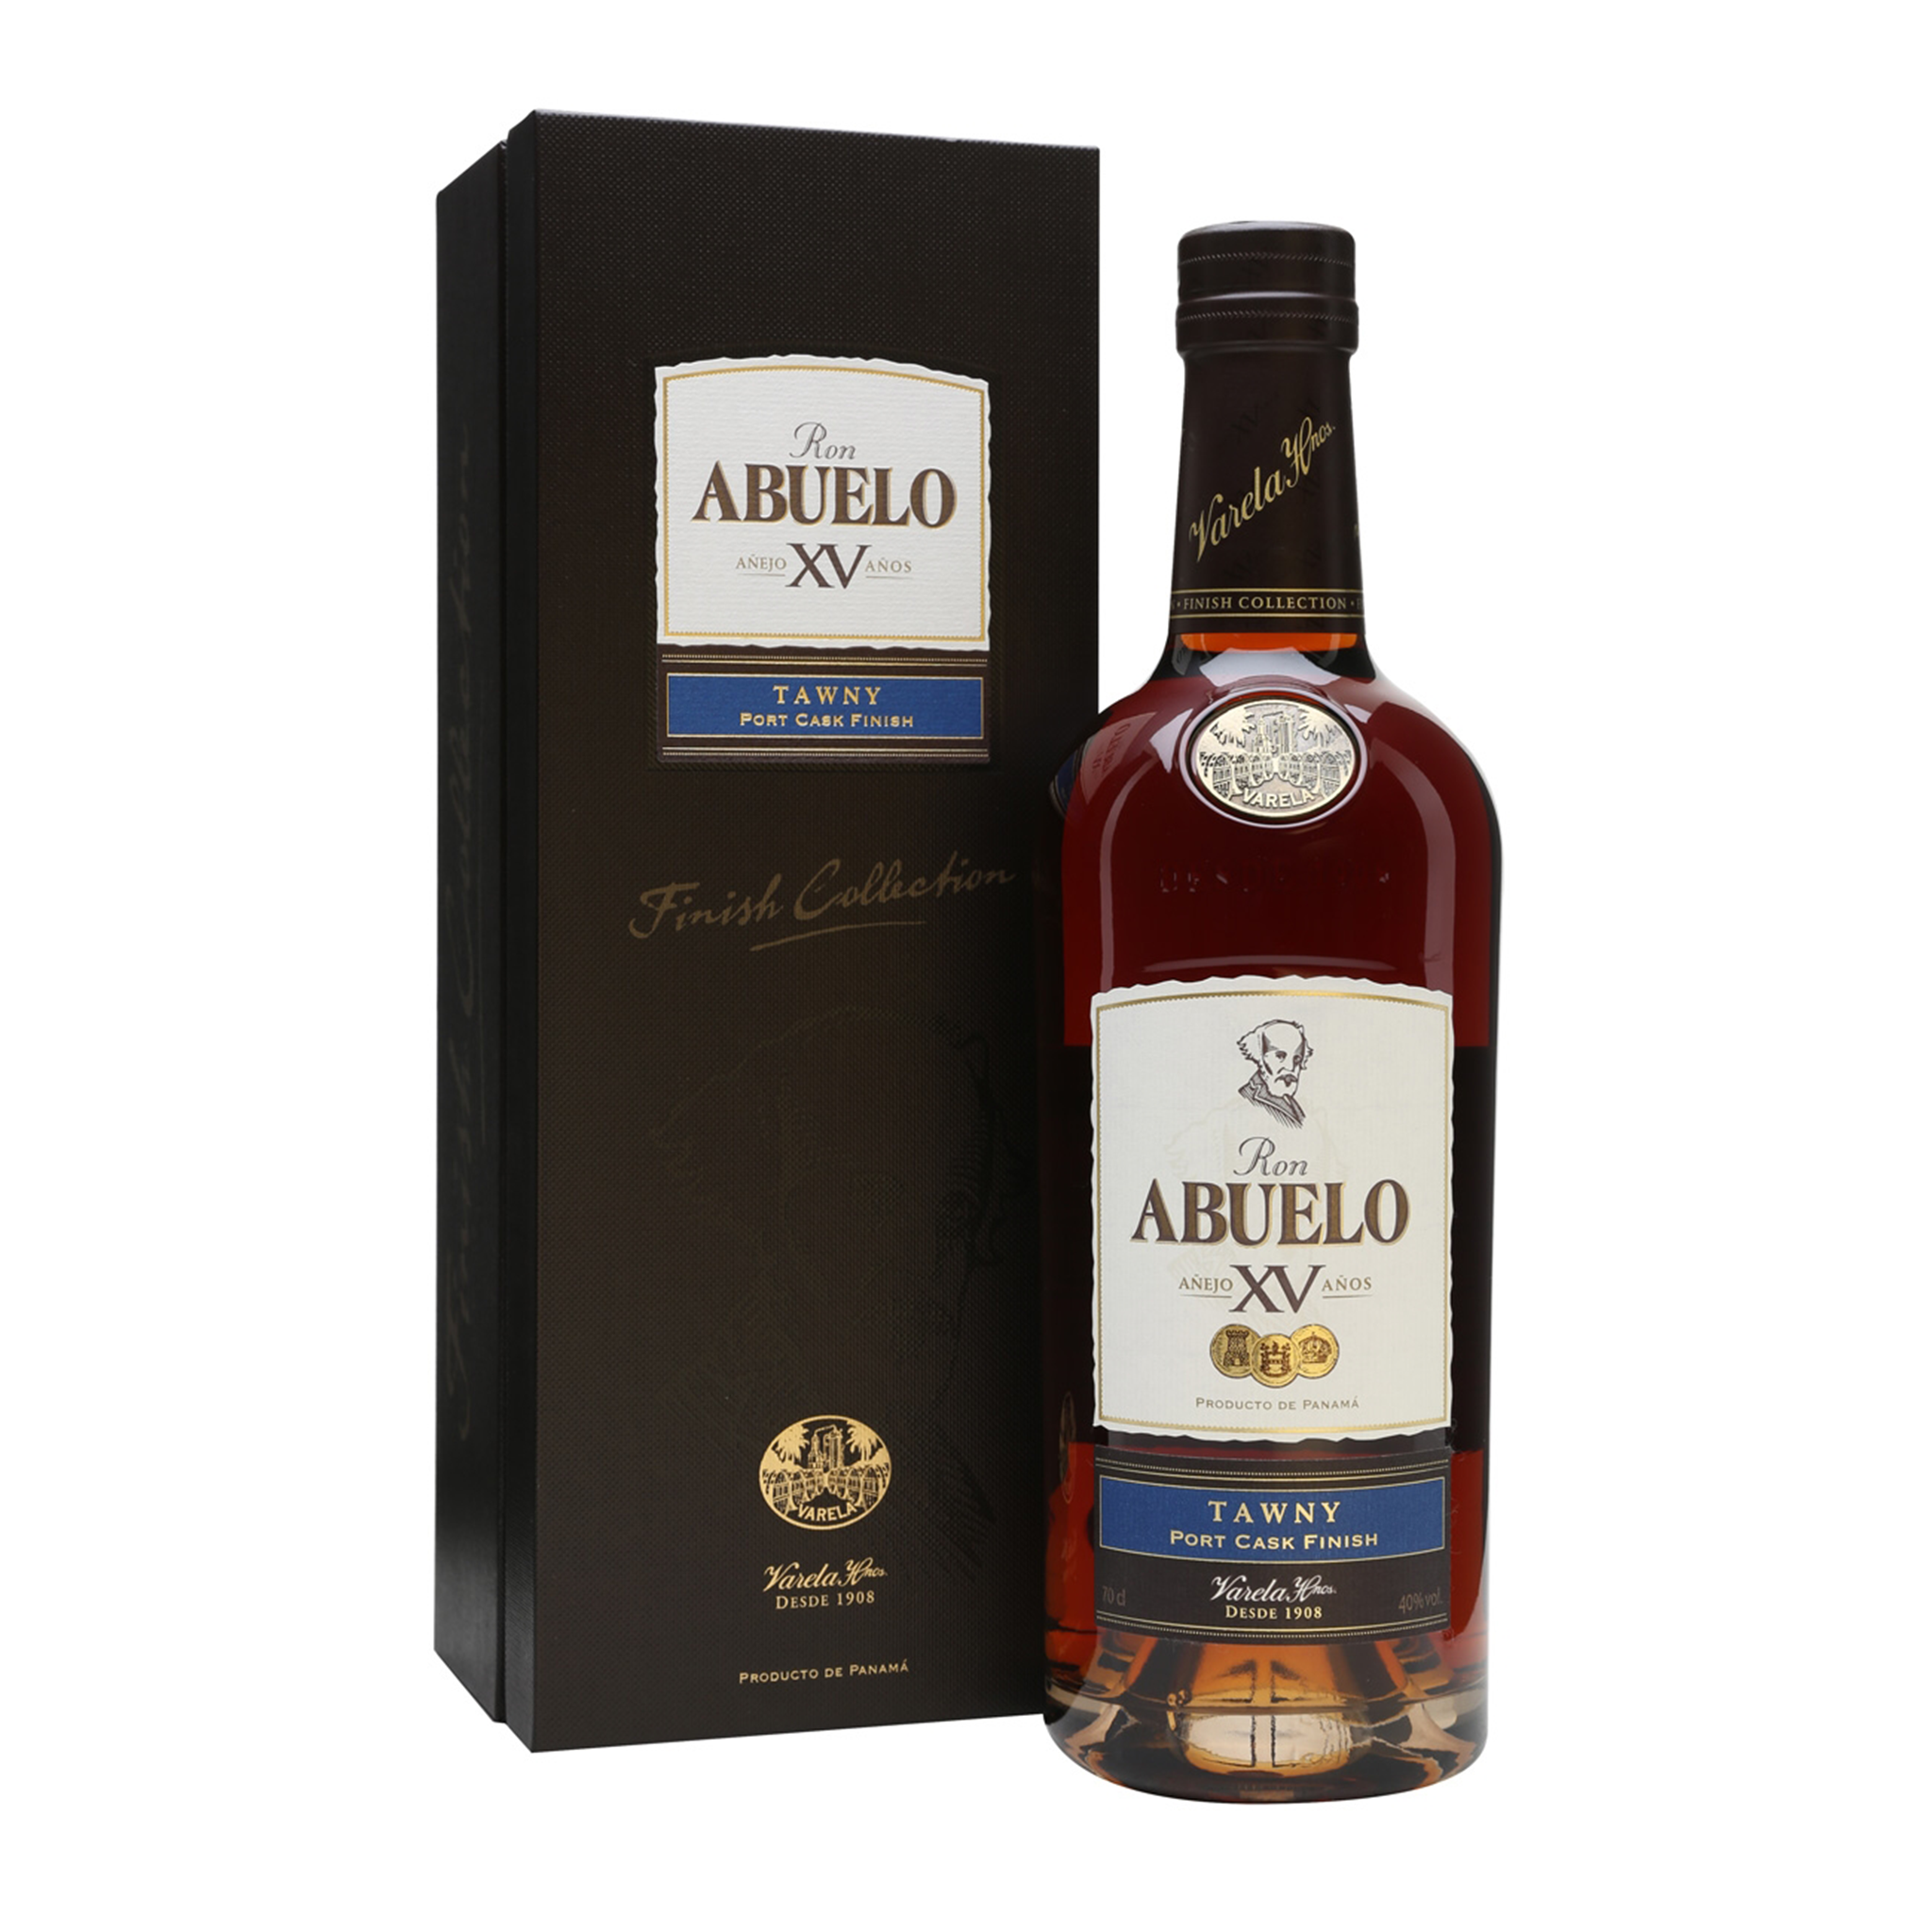 RON ABUELO XV AÑOS FINISH COLLECTION TAWNY x 750ML